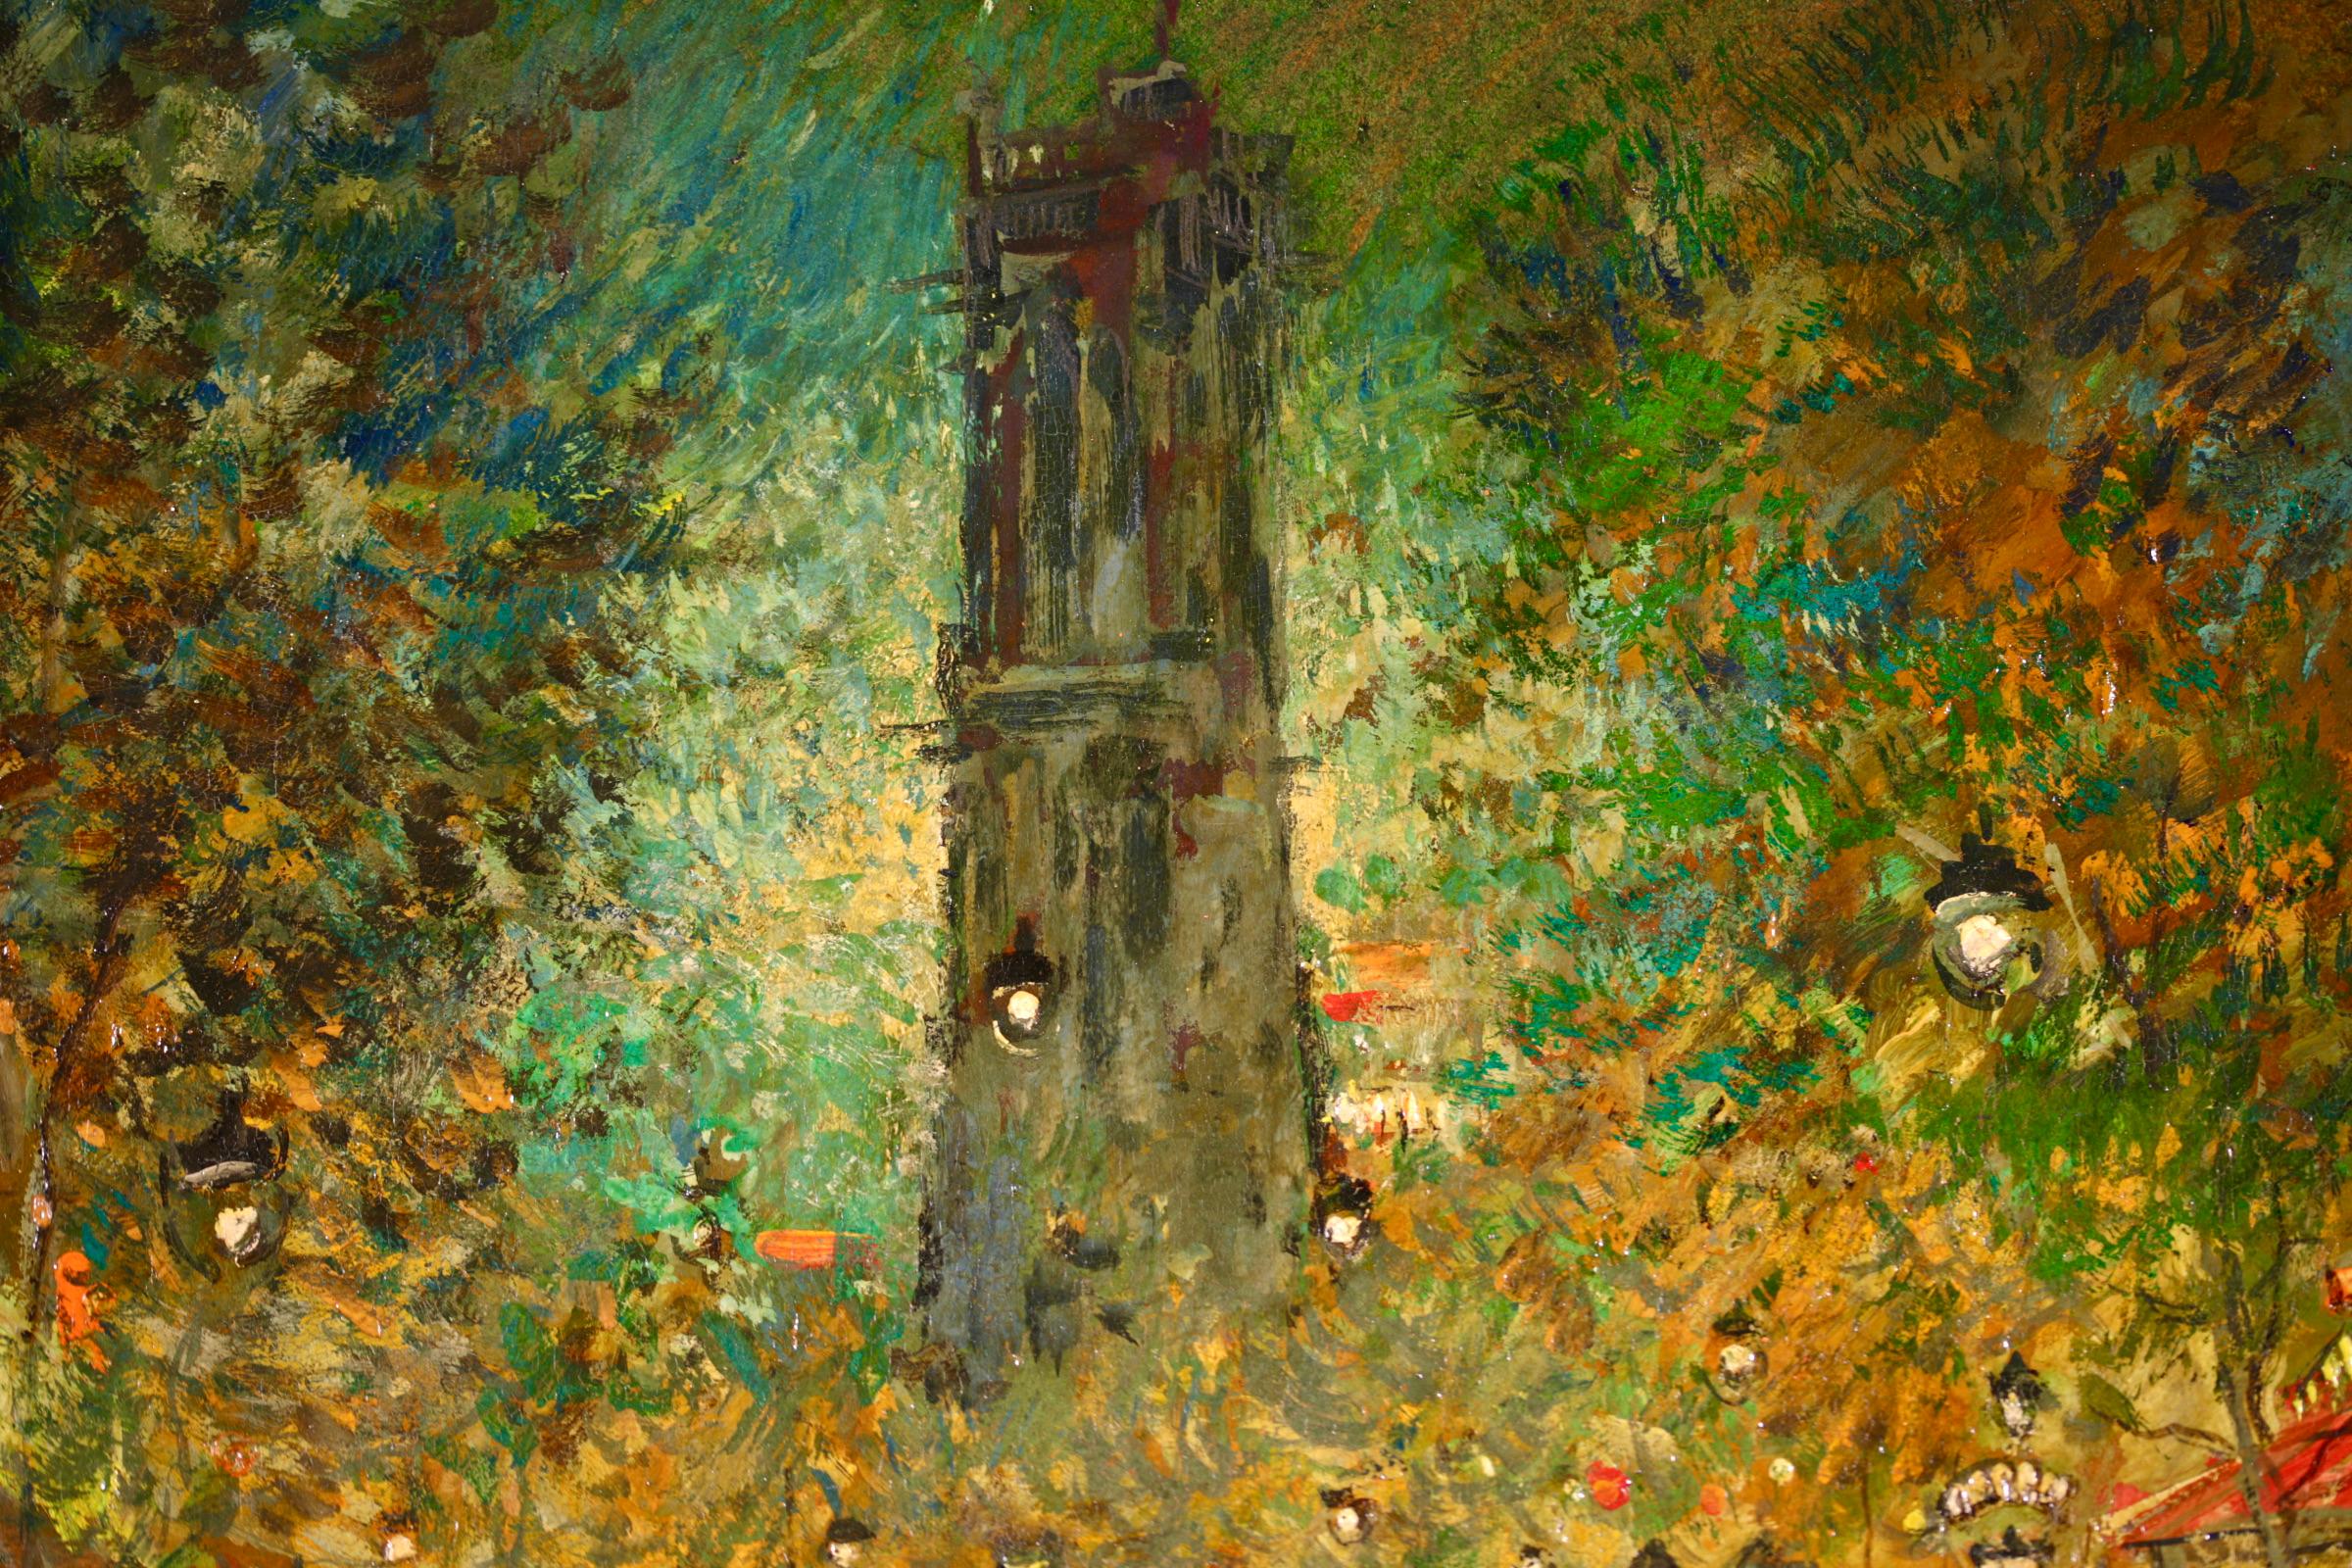 Signed and titled landscape oil on board by Russian-born impressionist painter Konstantin Alekseevich Korovin. The work depicts a nighttime view of the Saint Jacques tower in Paris, France. The street is illuminated by street lights and lights from